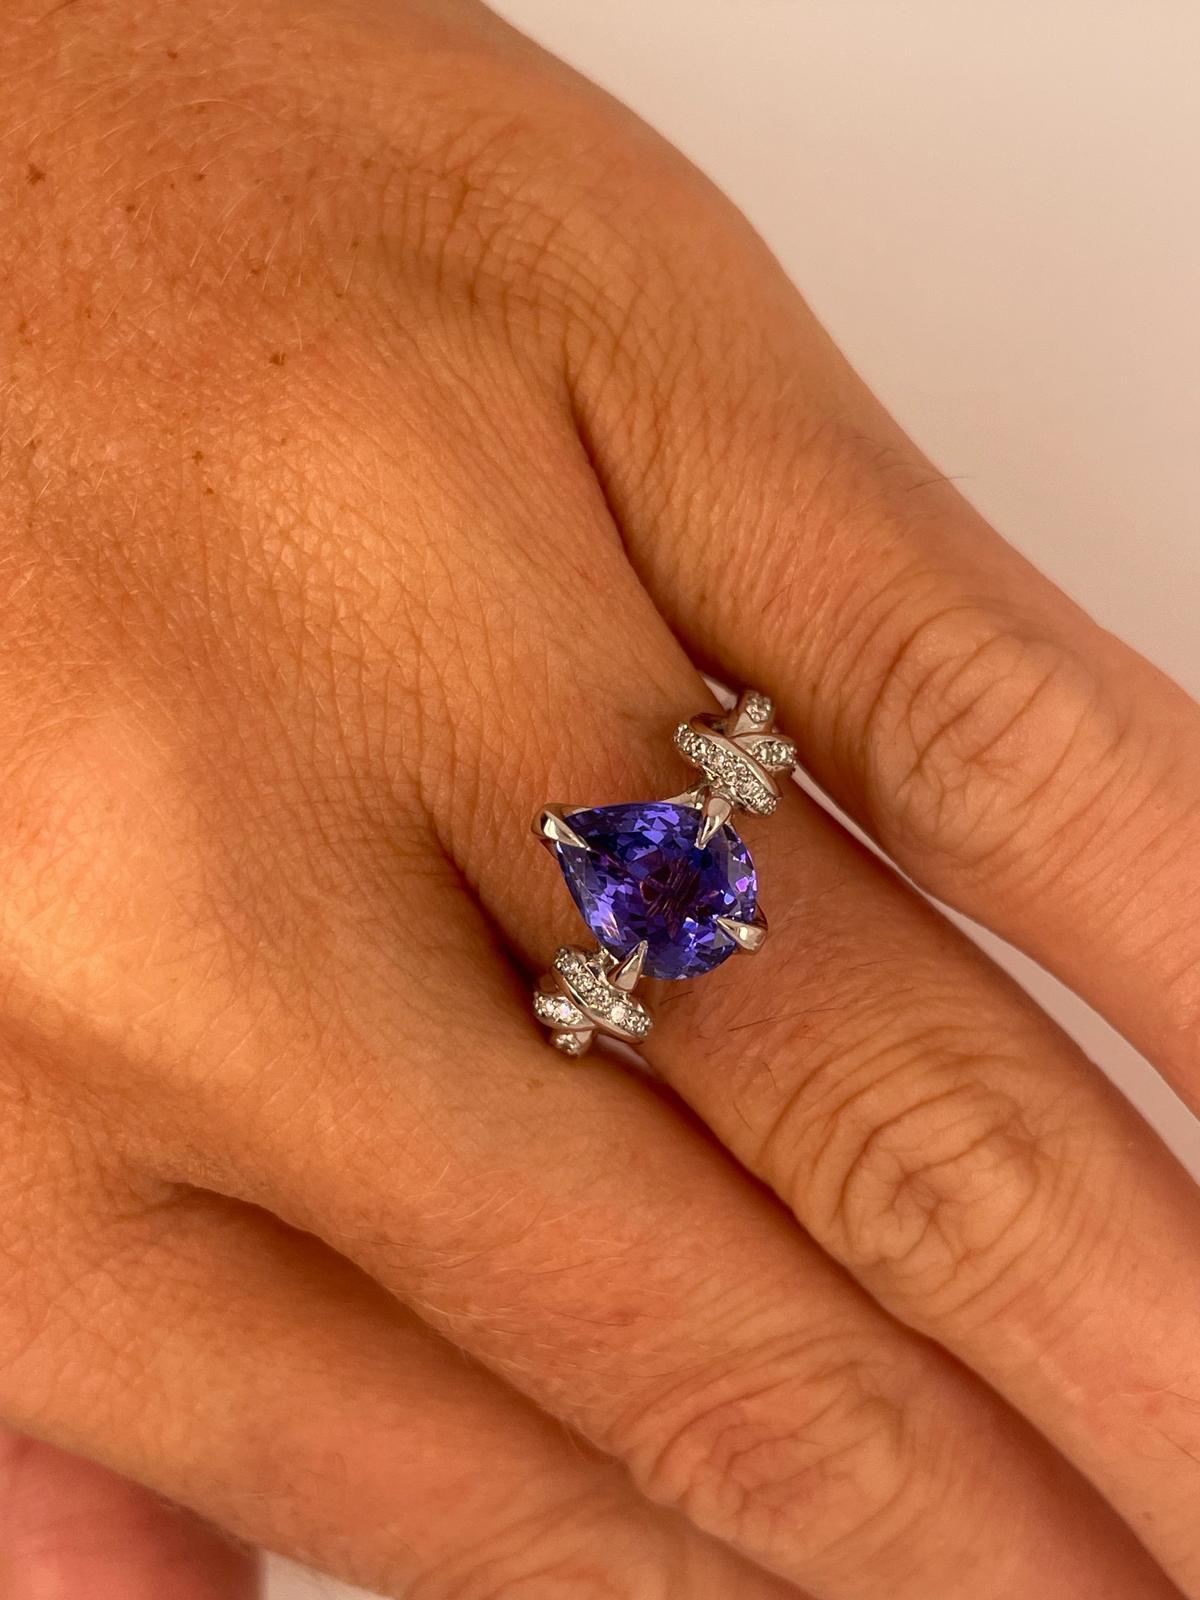 For Sale:  2ct tanzanite and diamond ring in platinum and rose gold  Forget me knot ring  13